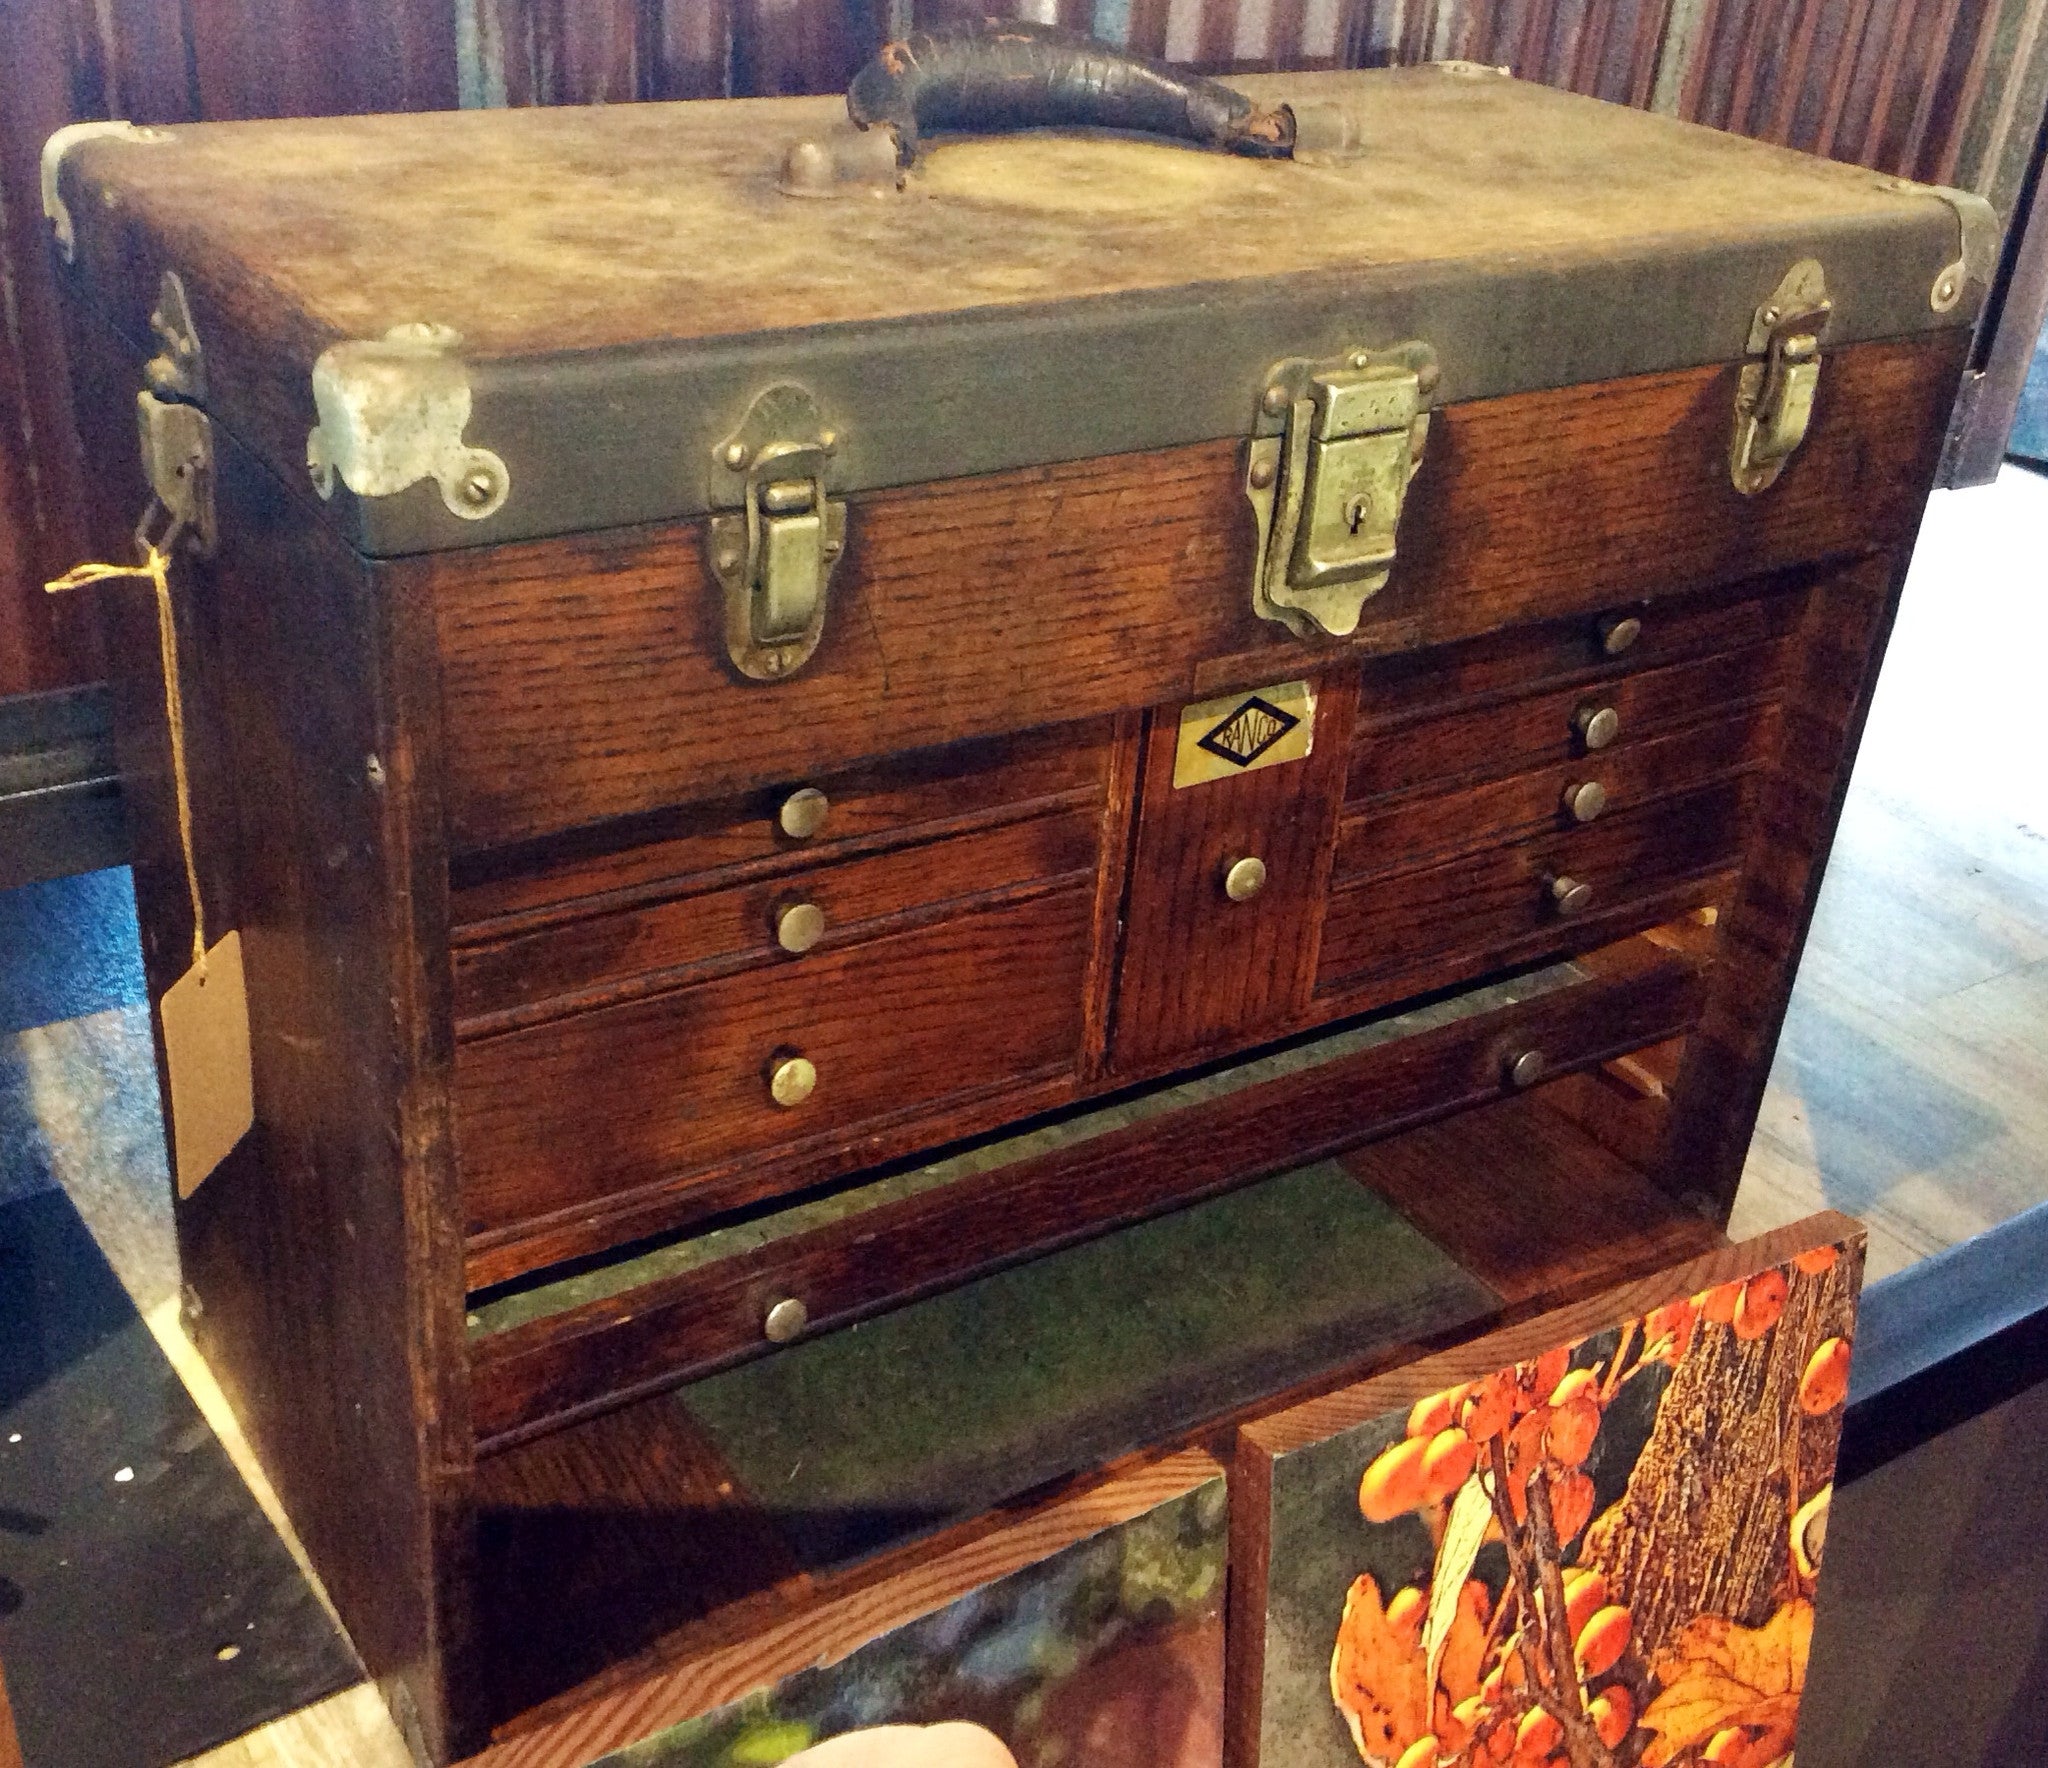 Wooden Tool Chest With Drawers